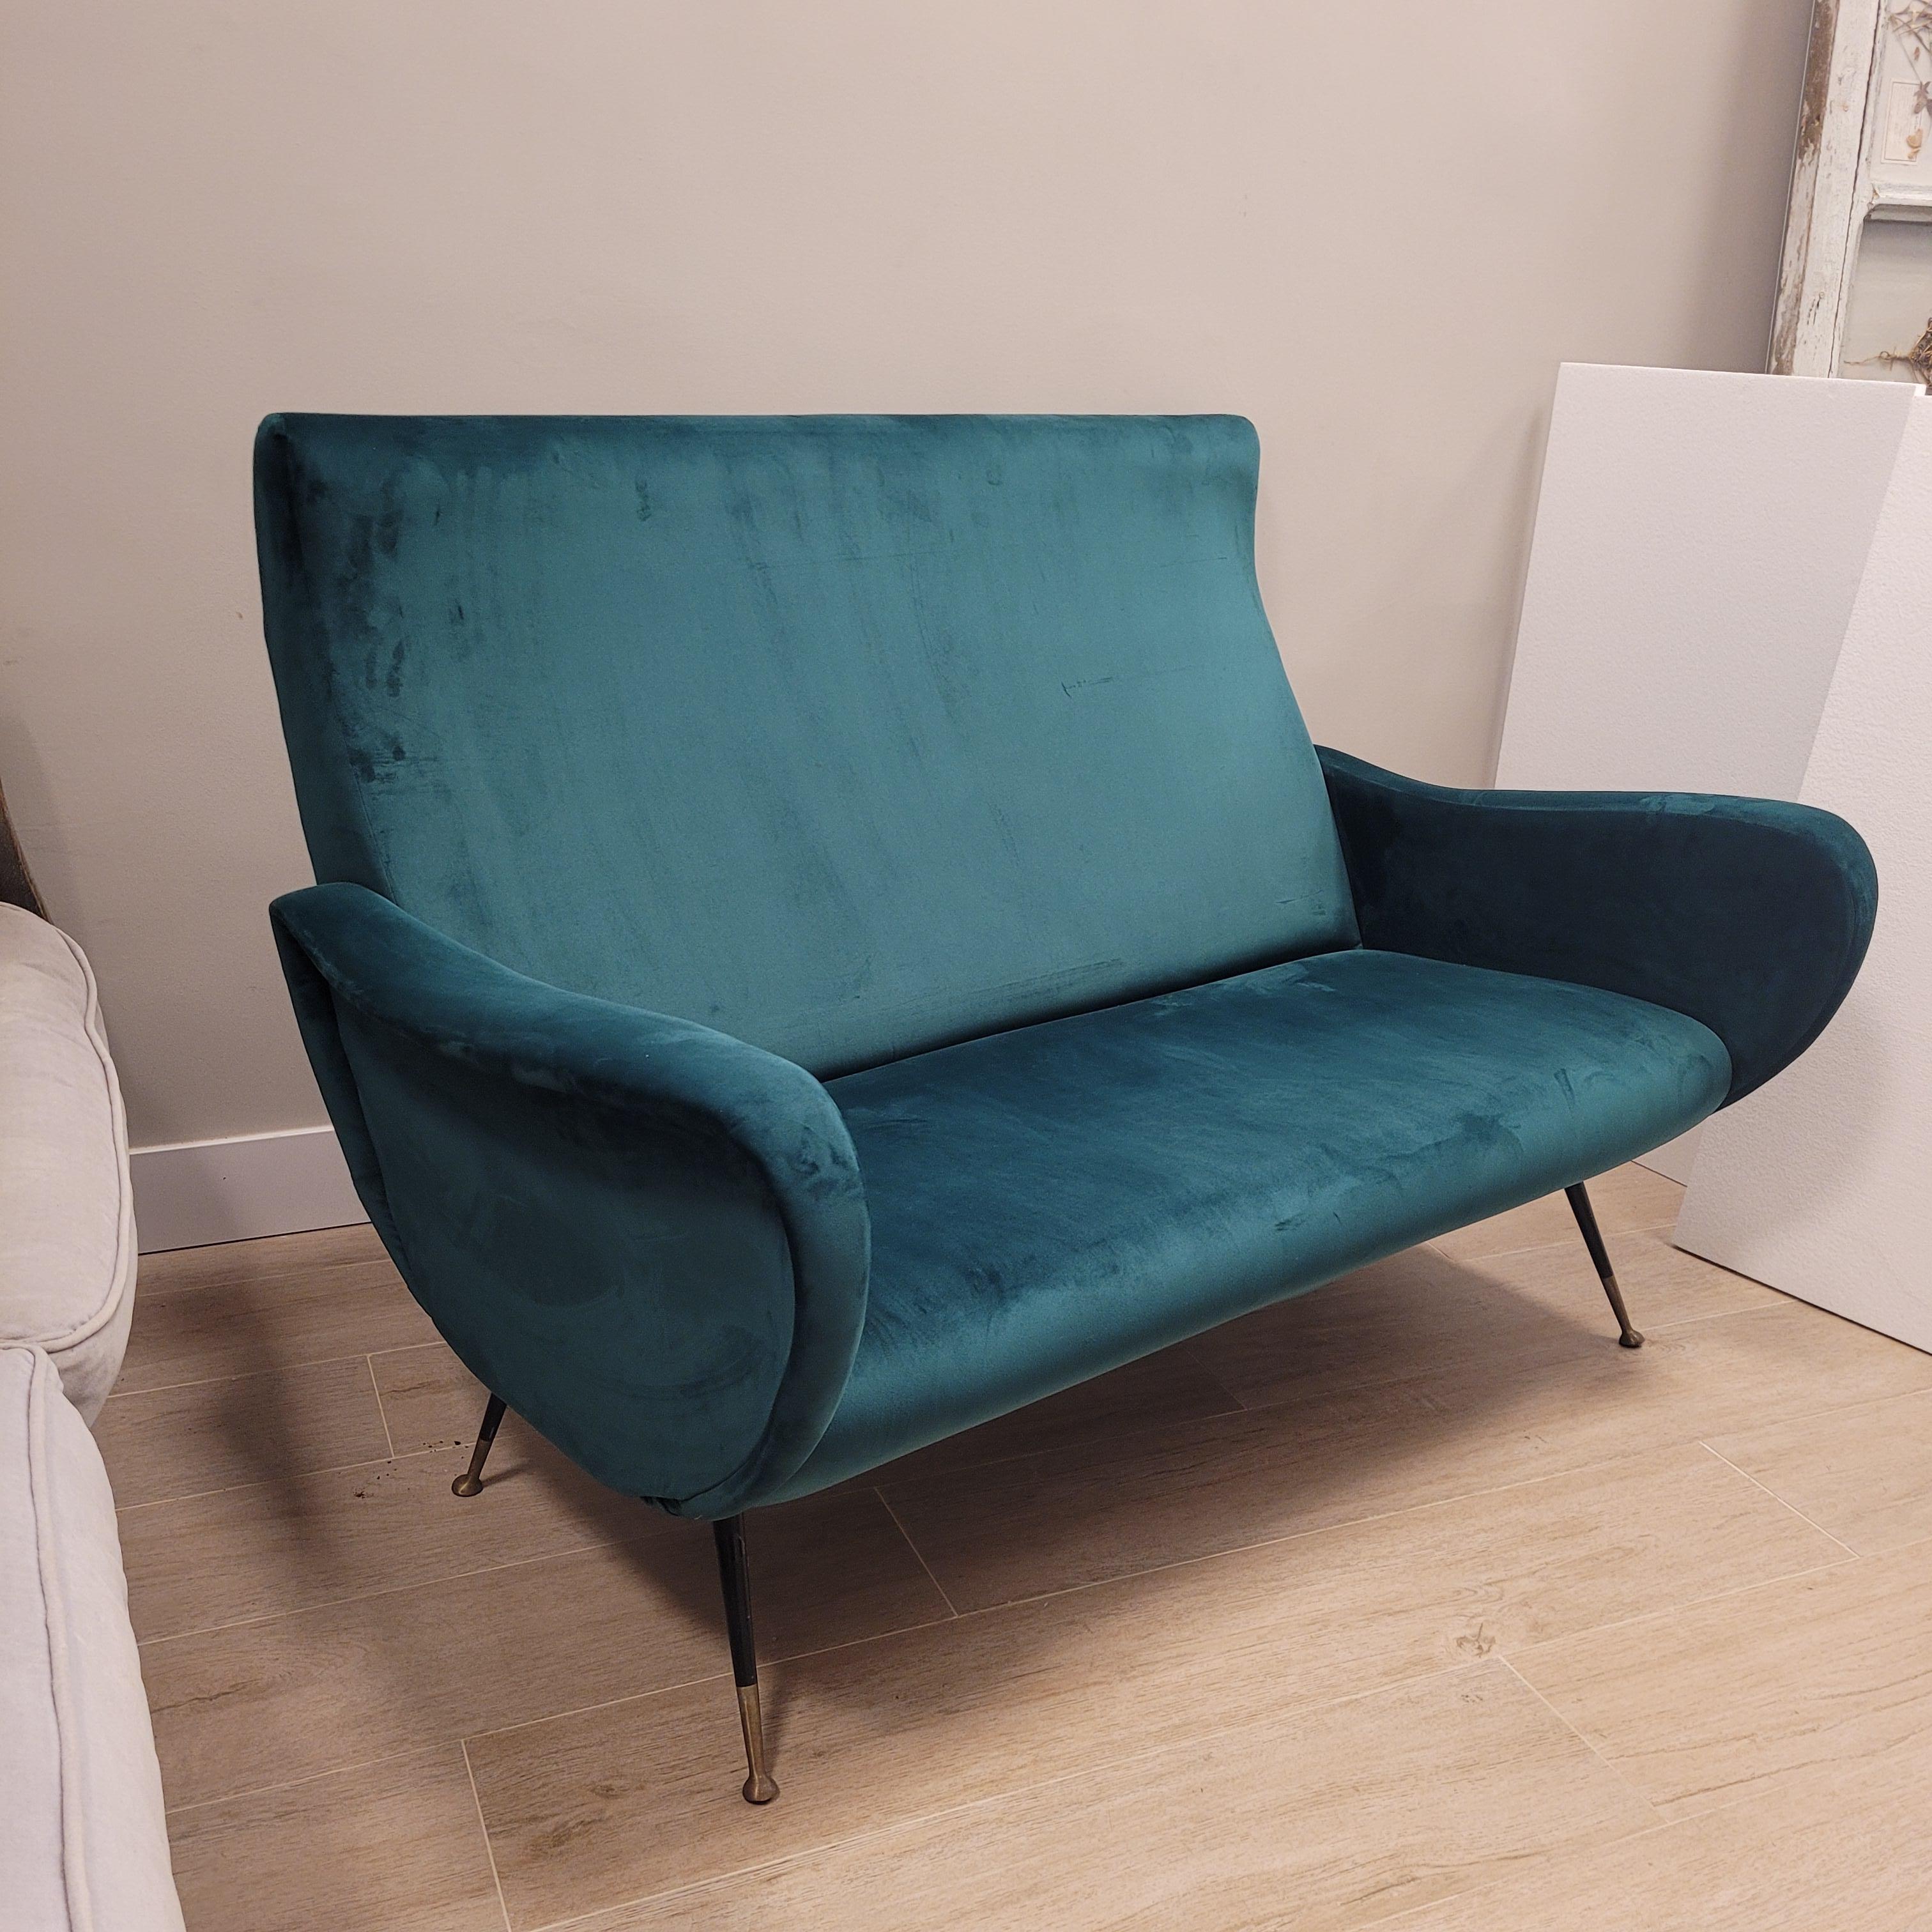 Amazing and beautiful Sofa Lady by Marco Zanuso for Arflex
Designed in 1951 by the Italian architect and furniture manufacturer Marco Zanuso, this iconic sofa is a symbol of style, material and technological innovation. They won a gold medal at the